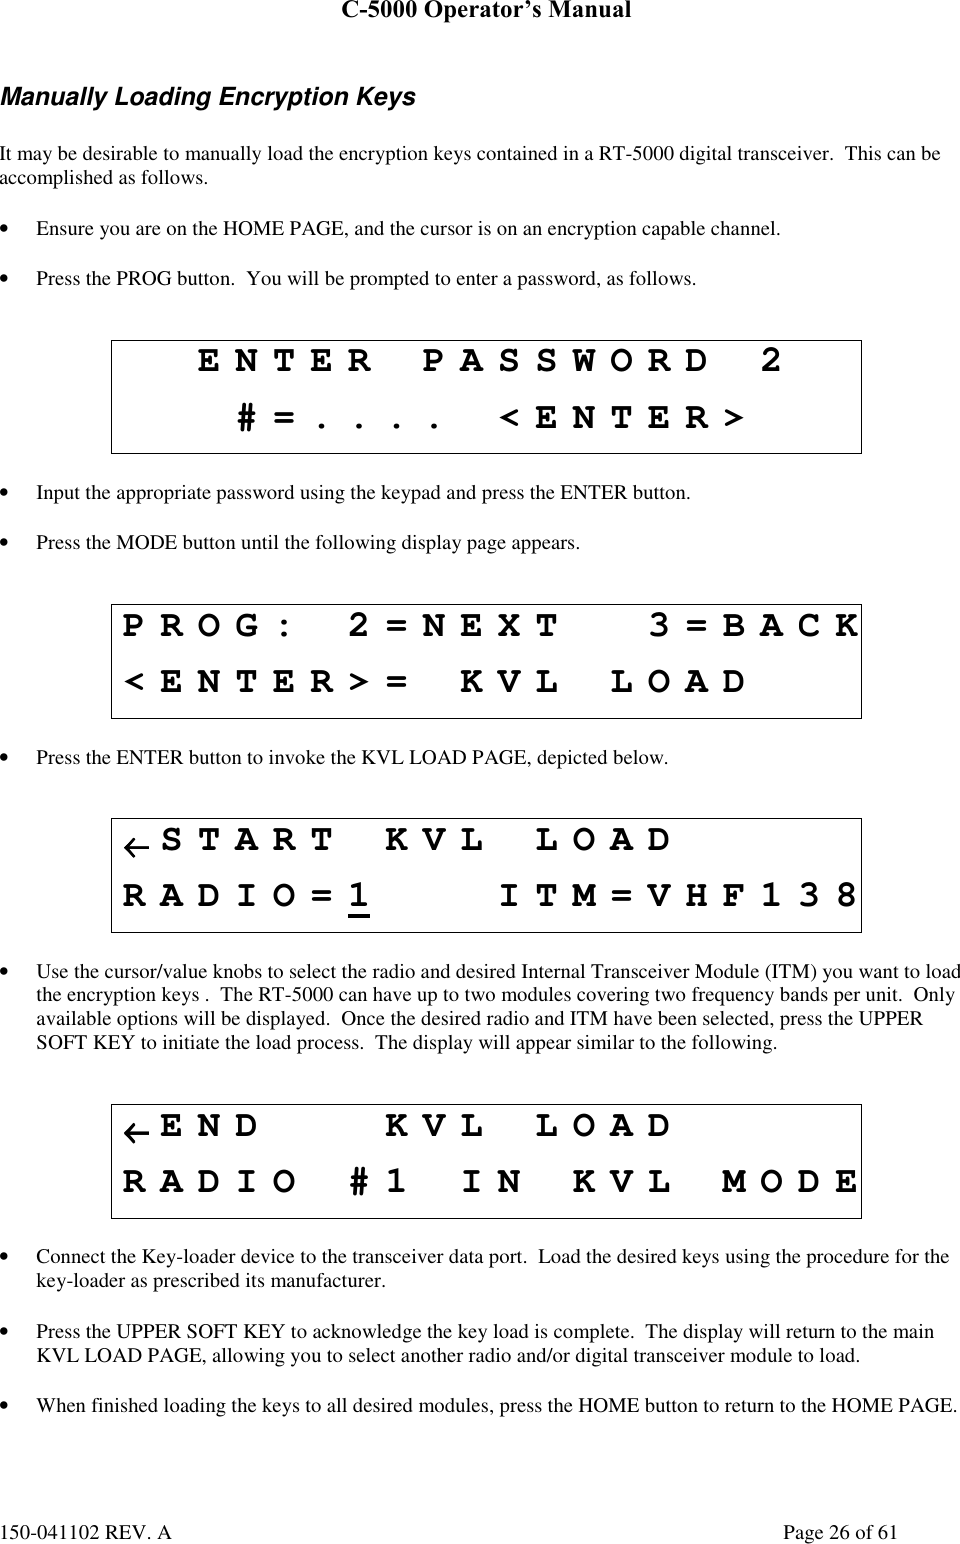 C-5000 Operator’s Manual150-041102 REV. A Page 26 of 61Manually Loading Encryption KeysIt may be desirable to manually load the encryption keys contained in a RT-5000 digital transceiver.  This can beaccomplished as follows.• Ensure you are on the HOME PAGE, and the cursor is on an encryption capable channel.• Press the PROG button.  You will be prompted to enter a password, as follows.ENTER PASSWORD 2#=.... &lt;ENTER&gt;• Input the appropriate password using the keypad and press the ENTER button.• Press the MODE button until the following display page appears.PROG: 2=NEXT 3=BACK&lt;ENTER&gt;= KVL LOAD• Press the ENTER button to invoke the KVL LOAD PAGE, depicted below.←←←←START KVL LOADRADIO=1 ITM=VHF138• Use the cursor/value knobs to select the radio and desired Internal Transceiver Module (ITM) you want to loadthe encryption keys .  The RT-5000 can have up to two modules covering two frequency bands per unit.  Onlyavailable options will be displayed.  Once the desired radio and ITM have been selected, press the UPPERSOFT KEY to initiate the load process.  The display will appear similar to the following.←←←←END KVL LOADRADIO #1 IN KVL MODE• Connect the Key-loader device to the transceiver data port.  Load the desired keys using the procedure for thekey-loader as prescribed its manufacturer.• Press the UPPER SOFT KEY to acknowledge the key load is complete.  The display will return to the mainKVL LOAD PAGE, allowing you to select another radio and/or digital transceiver module to load.• When finished loading the keys to all desired modules, press the HOME button to return to the HOME PAGE.